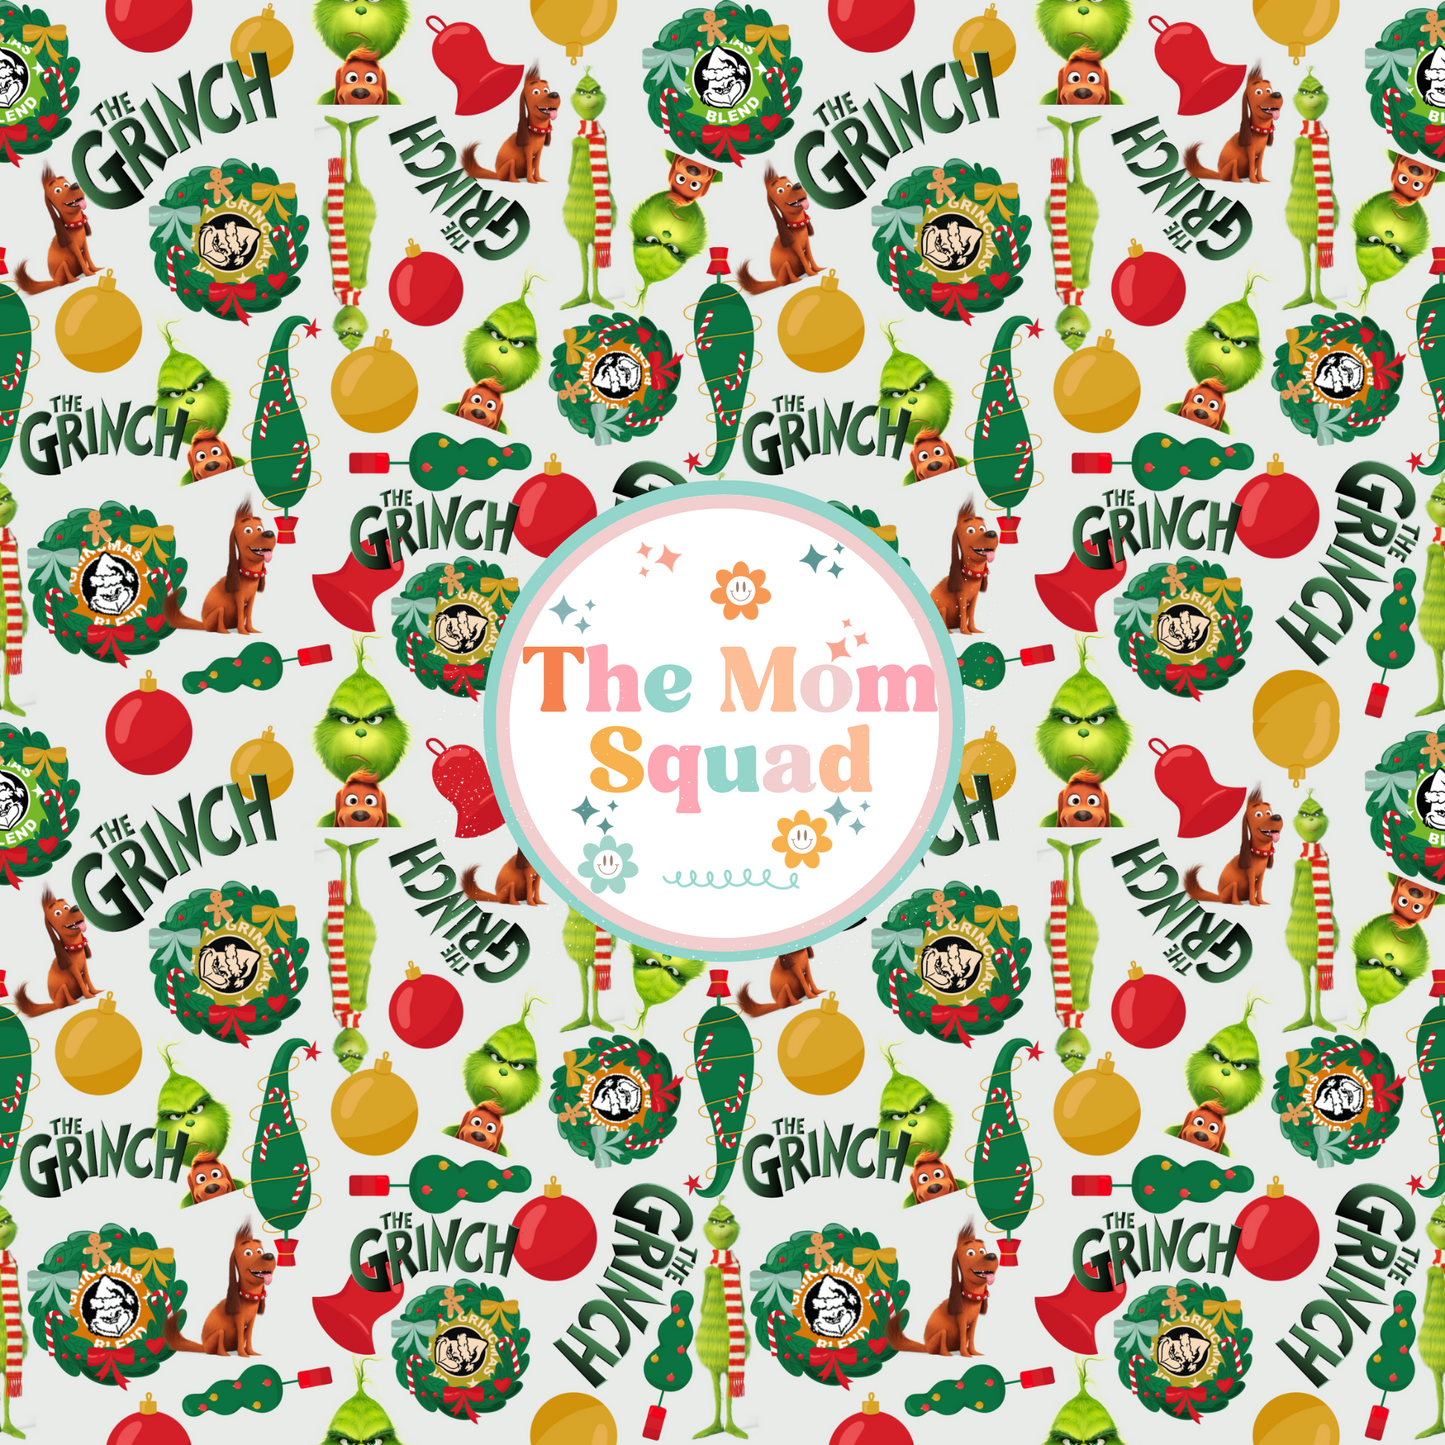 Get Festive with Our Grinch Christmas Seamless Printable Pattern - Perfect for Holiday Crafts!